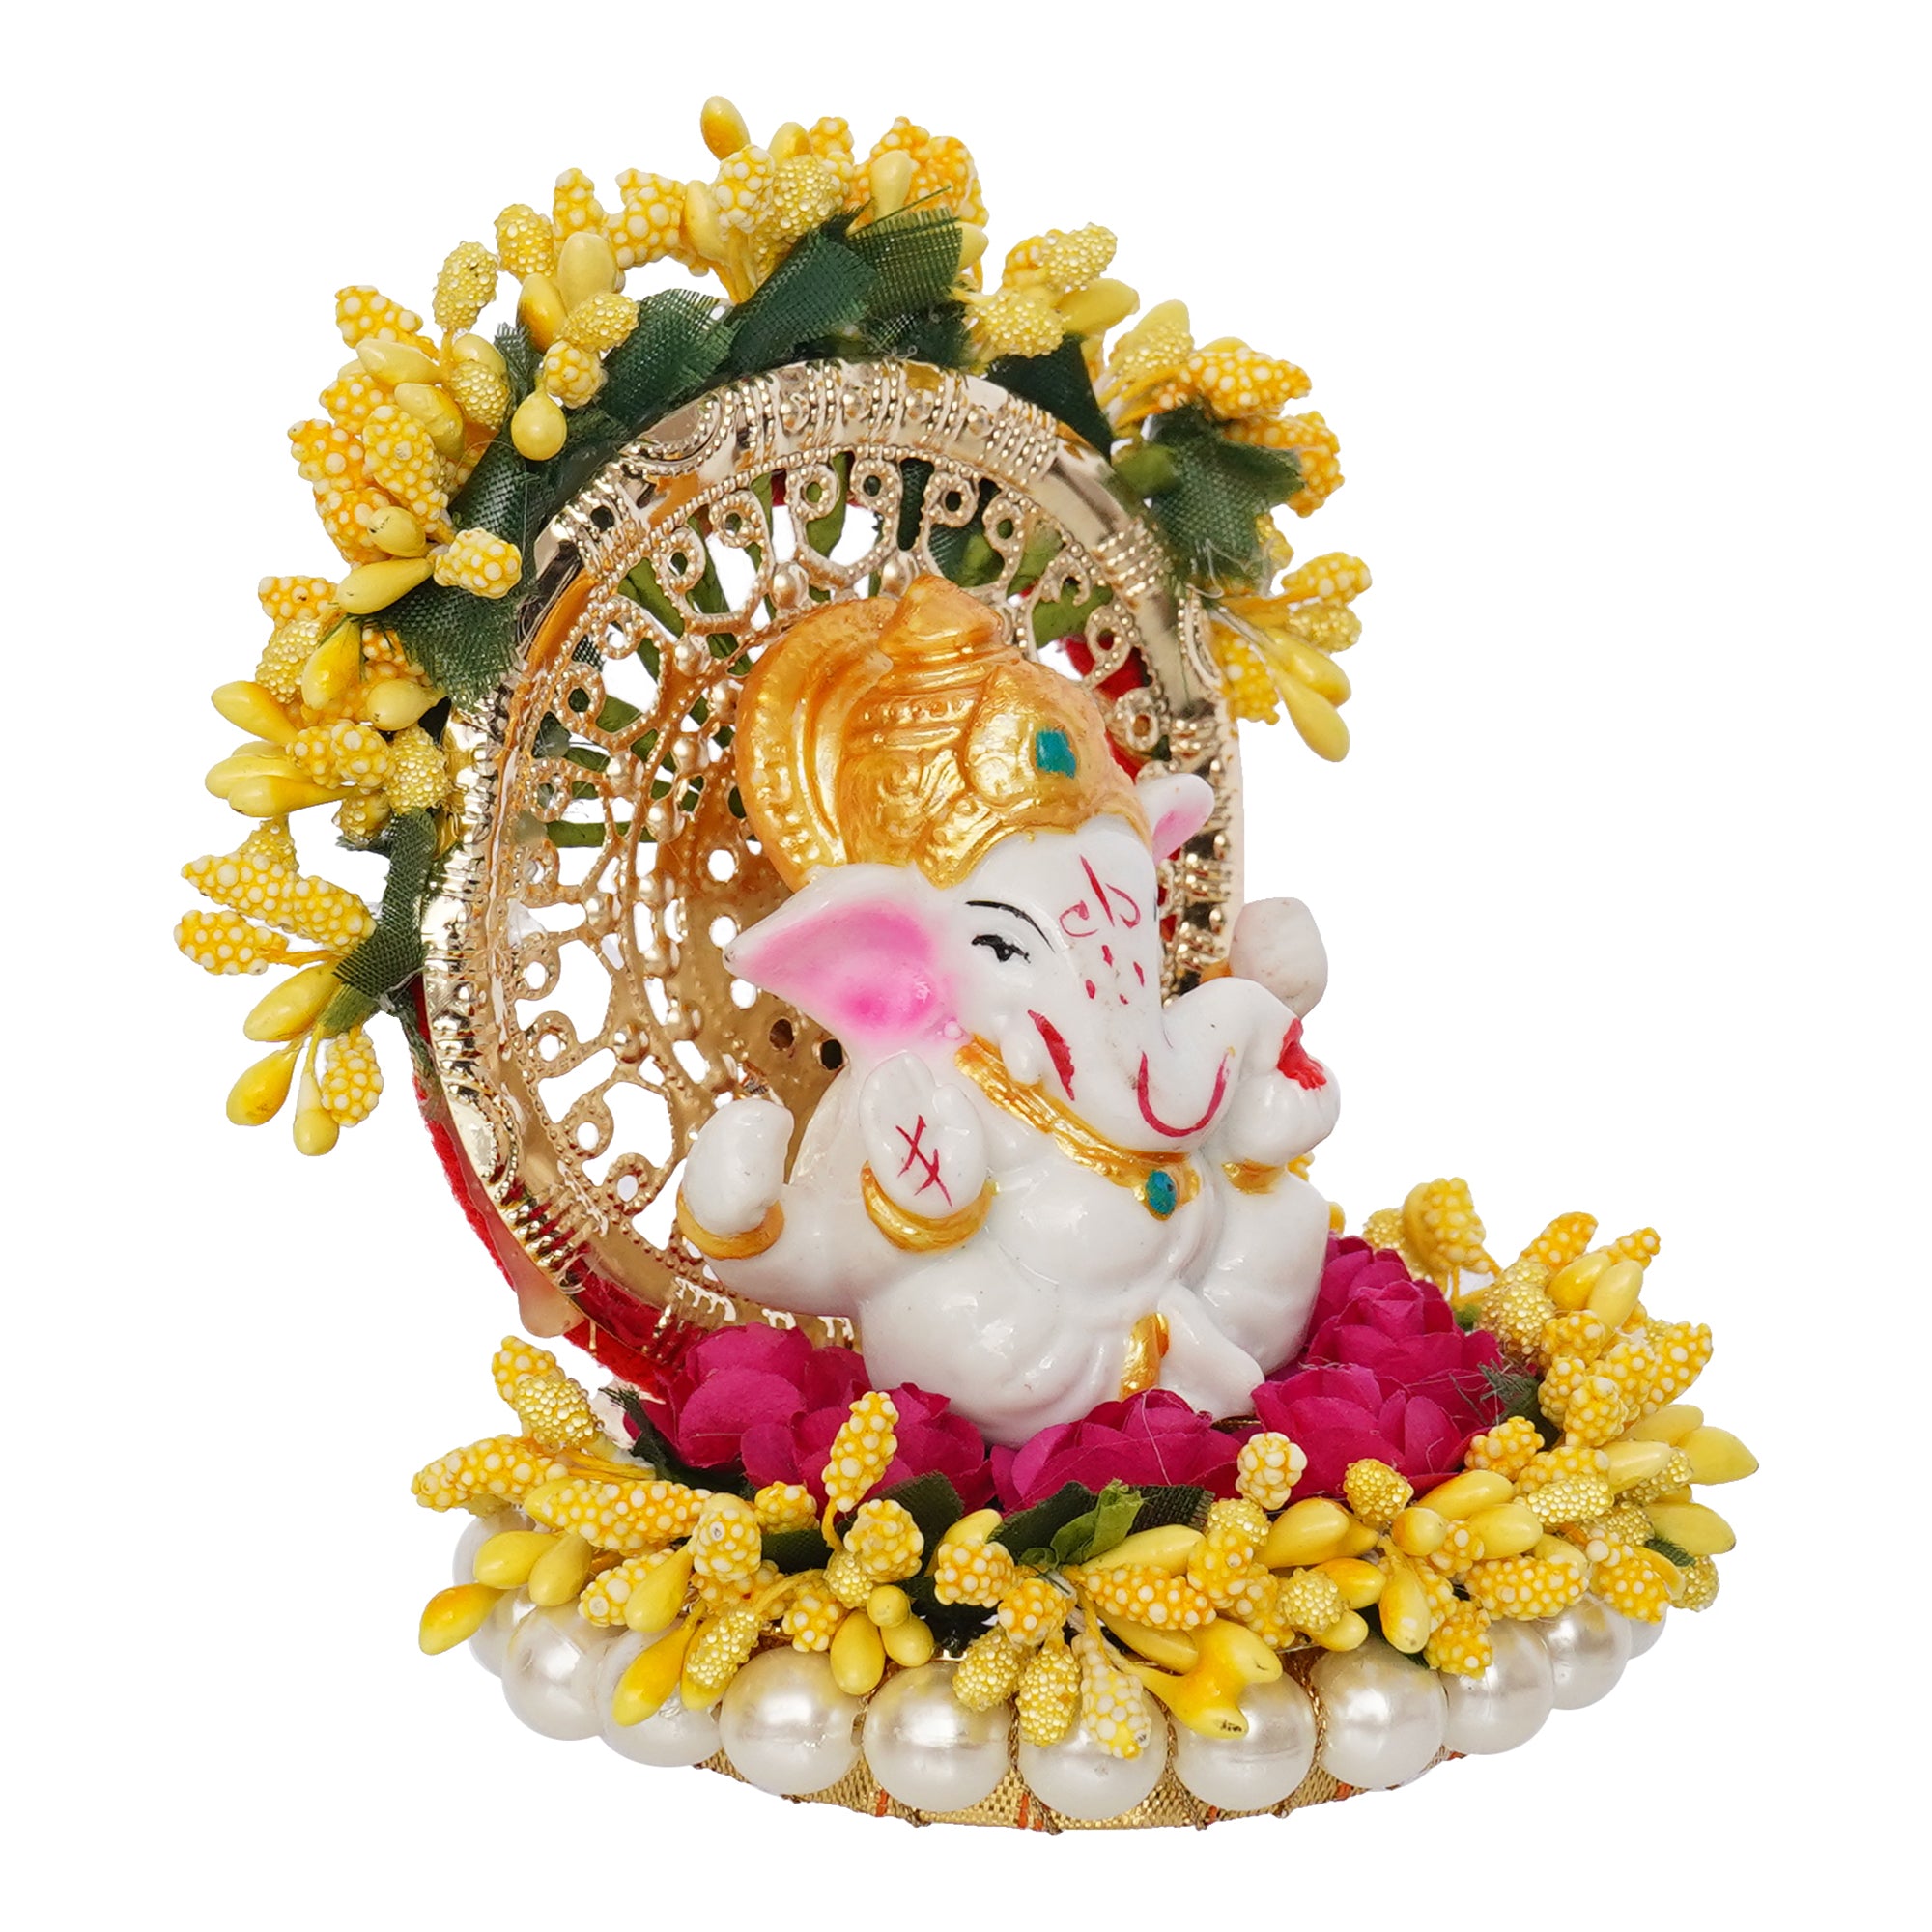 Polyresin Lord Ganesha Idol on Handcrafted Yellow Floral Plate for Home and Car Dashboard 4